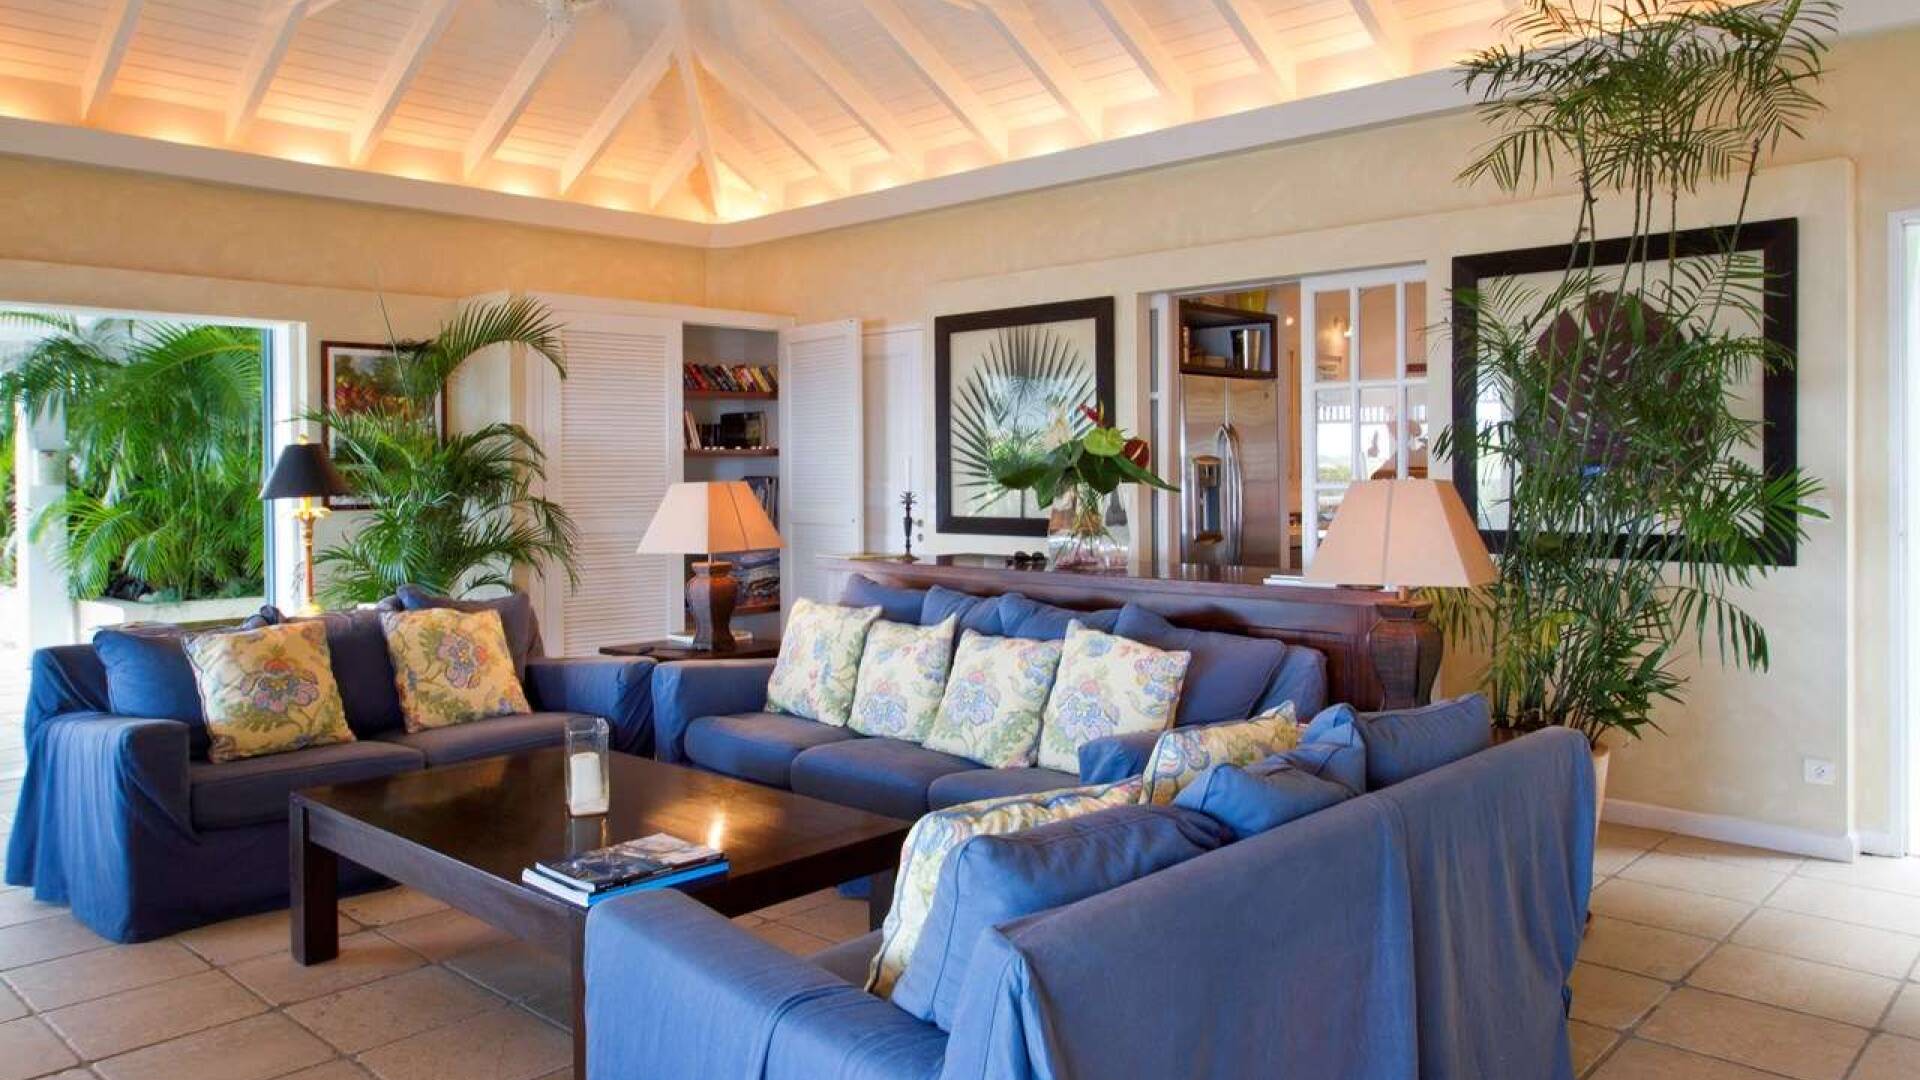 Living Room at WV AMI, Lurin, St. Barthelemy